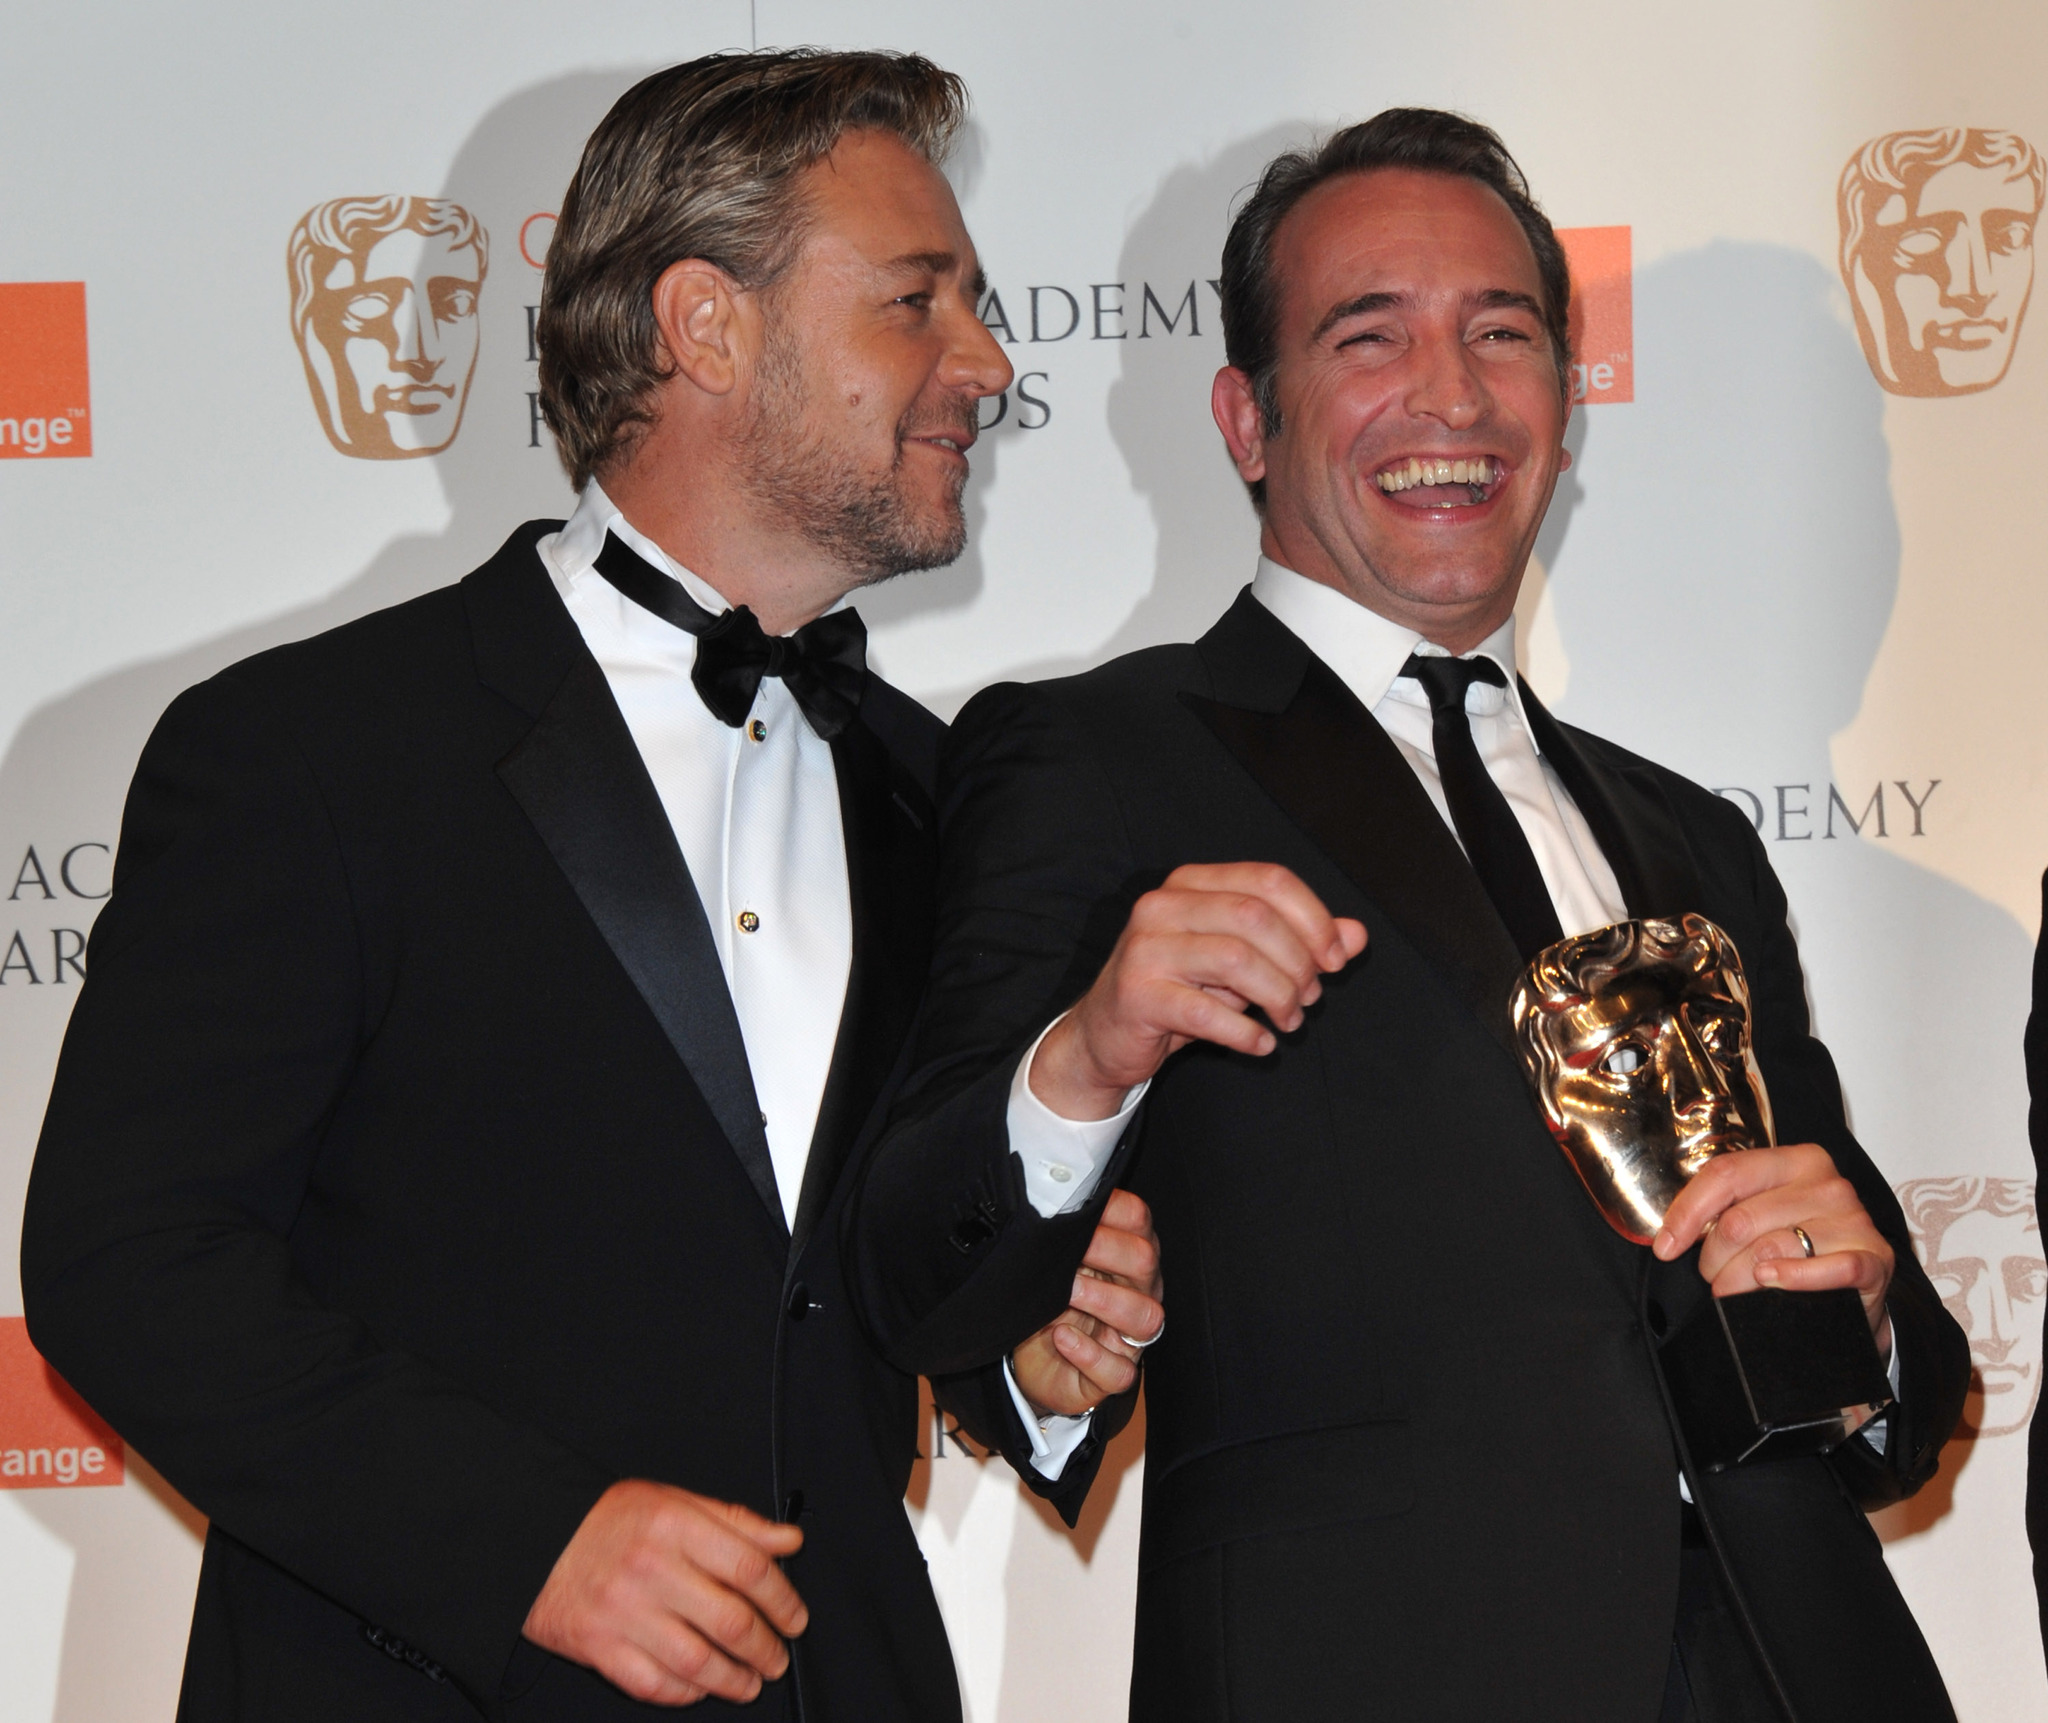 Russell Crowe and Jean Dujardin